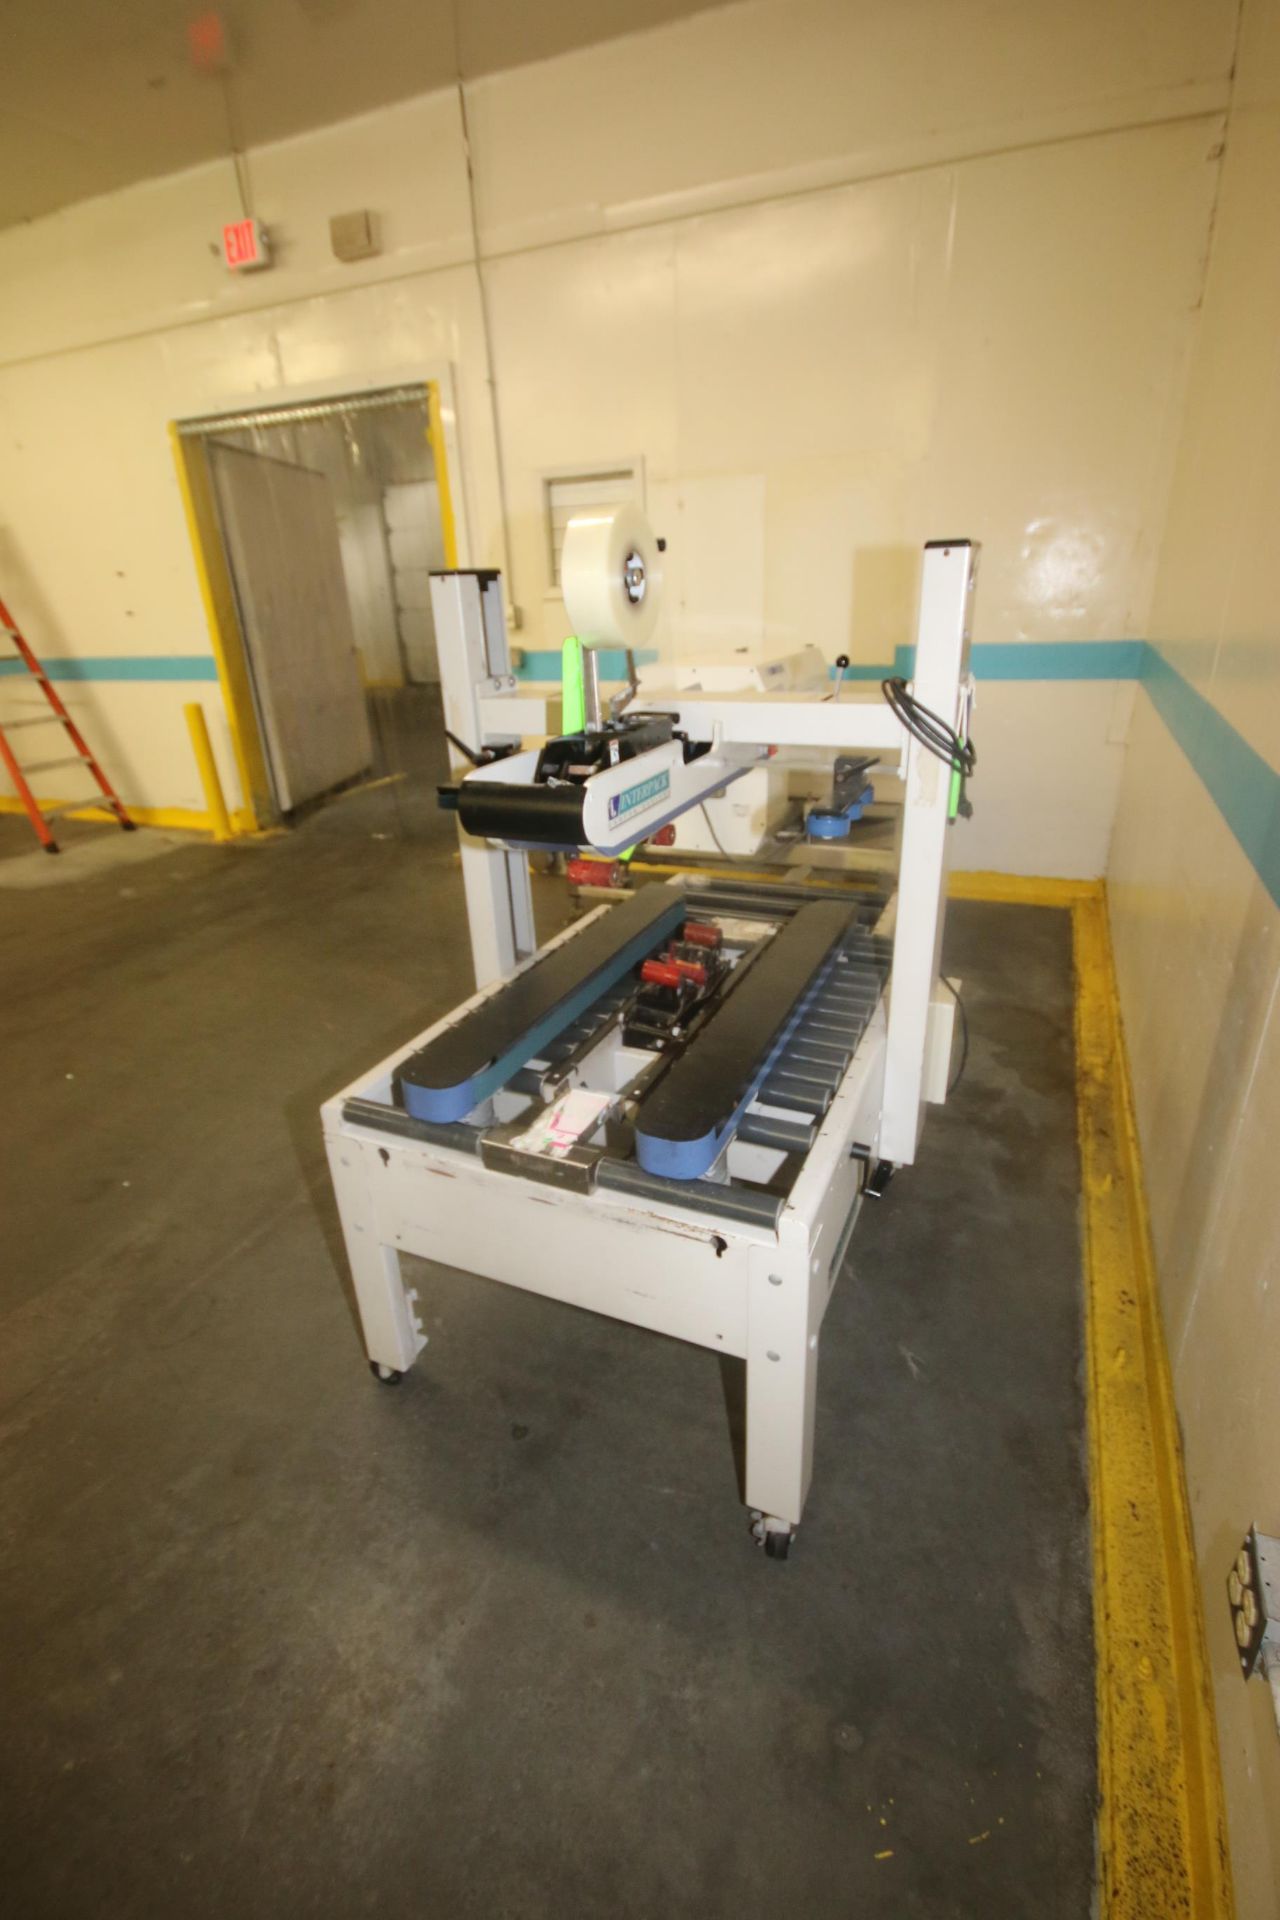 Interpack Top & Bottom Case Sealer, M/N USA 2024-SB/3, S/N C04 T544 003, 115 Volts, 1 Phase, Mounted - Image 3 of 6